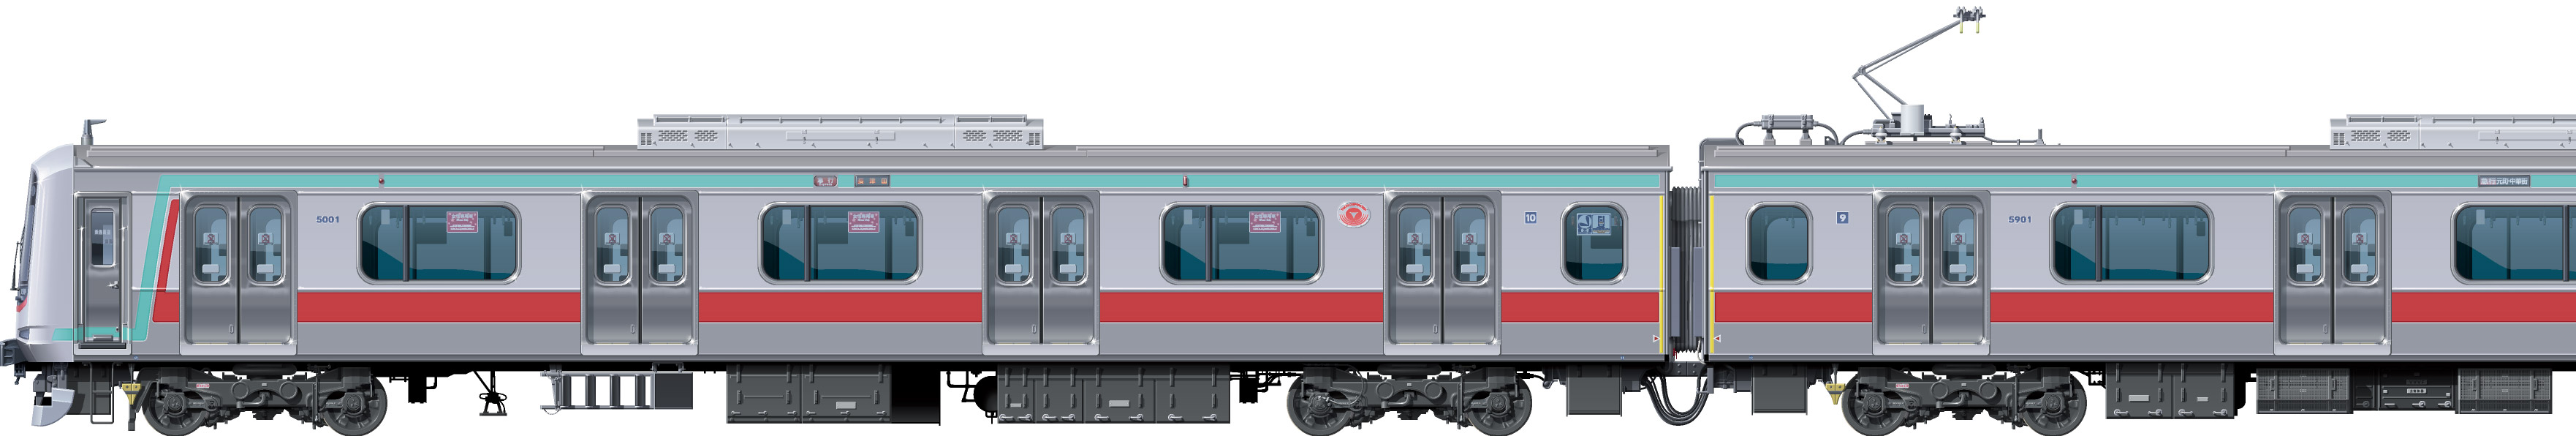 }5000n@2ځ@ʃCXg@ʃCXg@5000IIn@V5000n@Vʐ@css@tgr[CXg@TChr[CXg@yʃXeXJ[@20m@stainless car Tokyu Toyoko Line illustration sideview front view